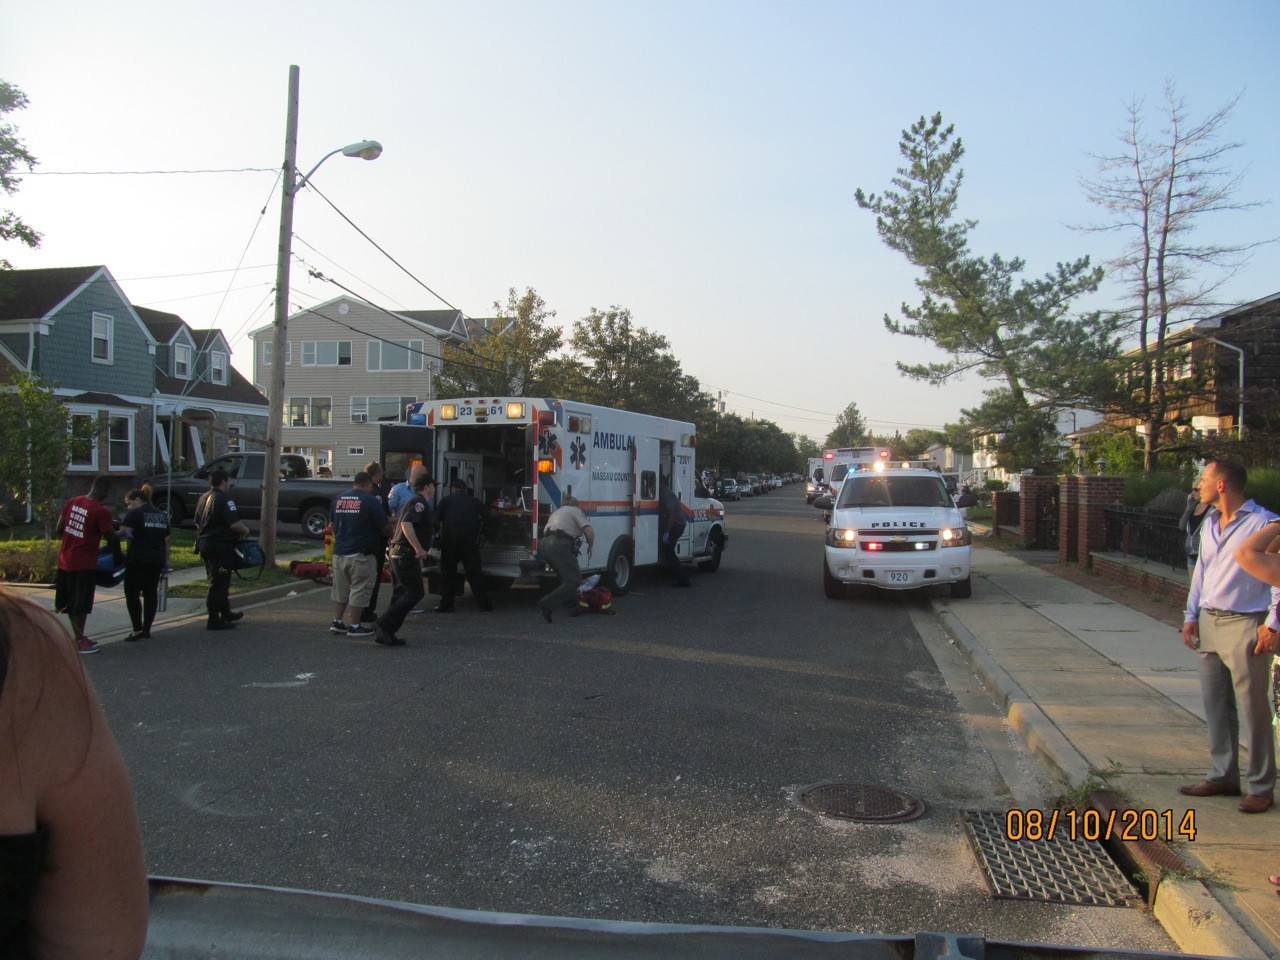 Nassau County police and EMS responded to Sterling Avenue in Freeport to transport Cesar Hernandez-Rodas, 34, of Bay Shore, to a local hospital after he was struck by a boat operated by Baldwin’s Raymond Balboa.